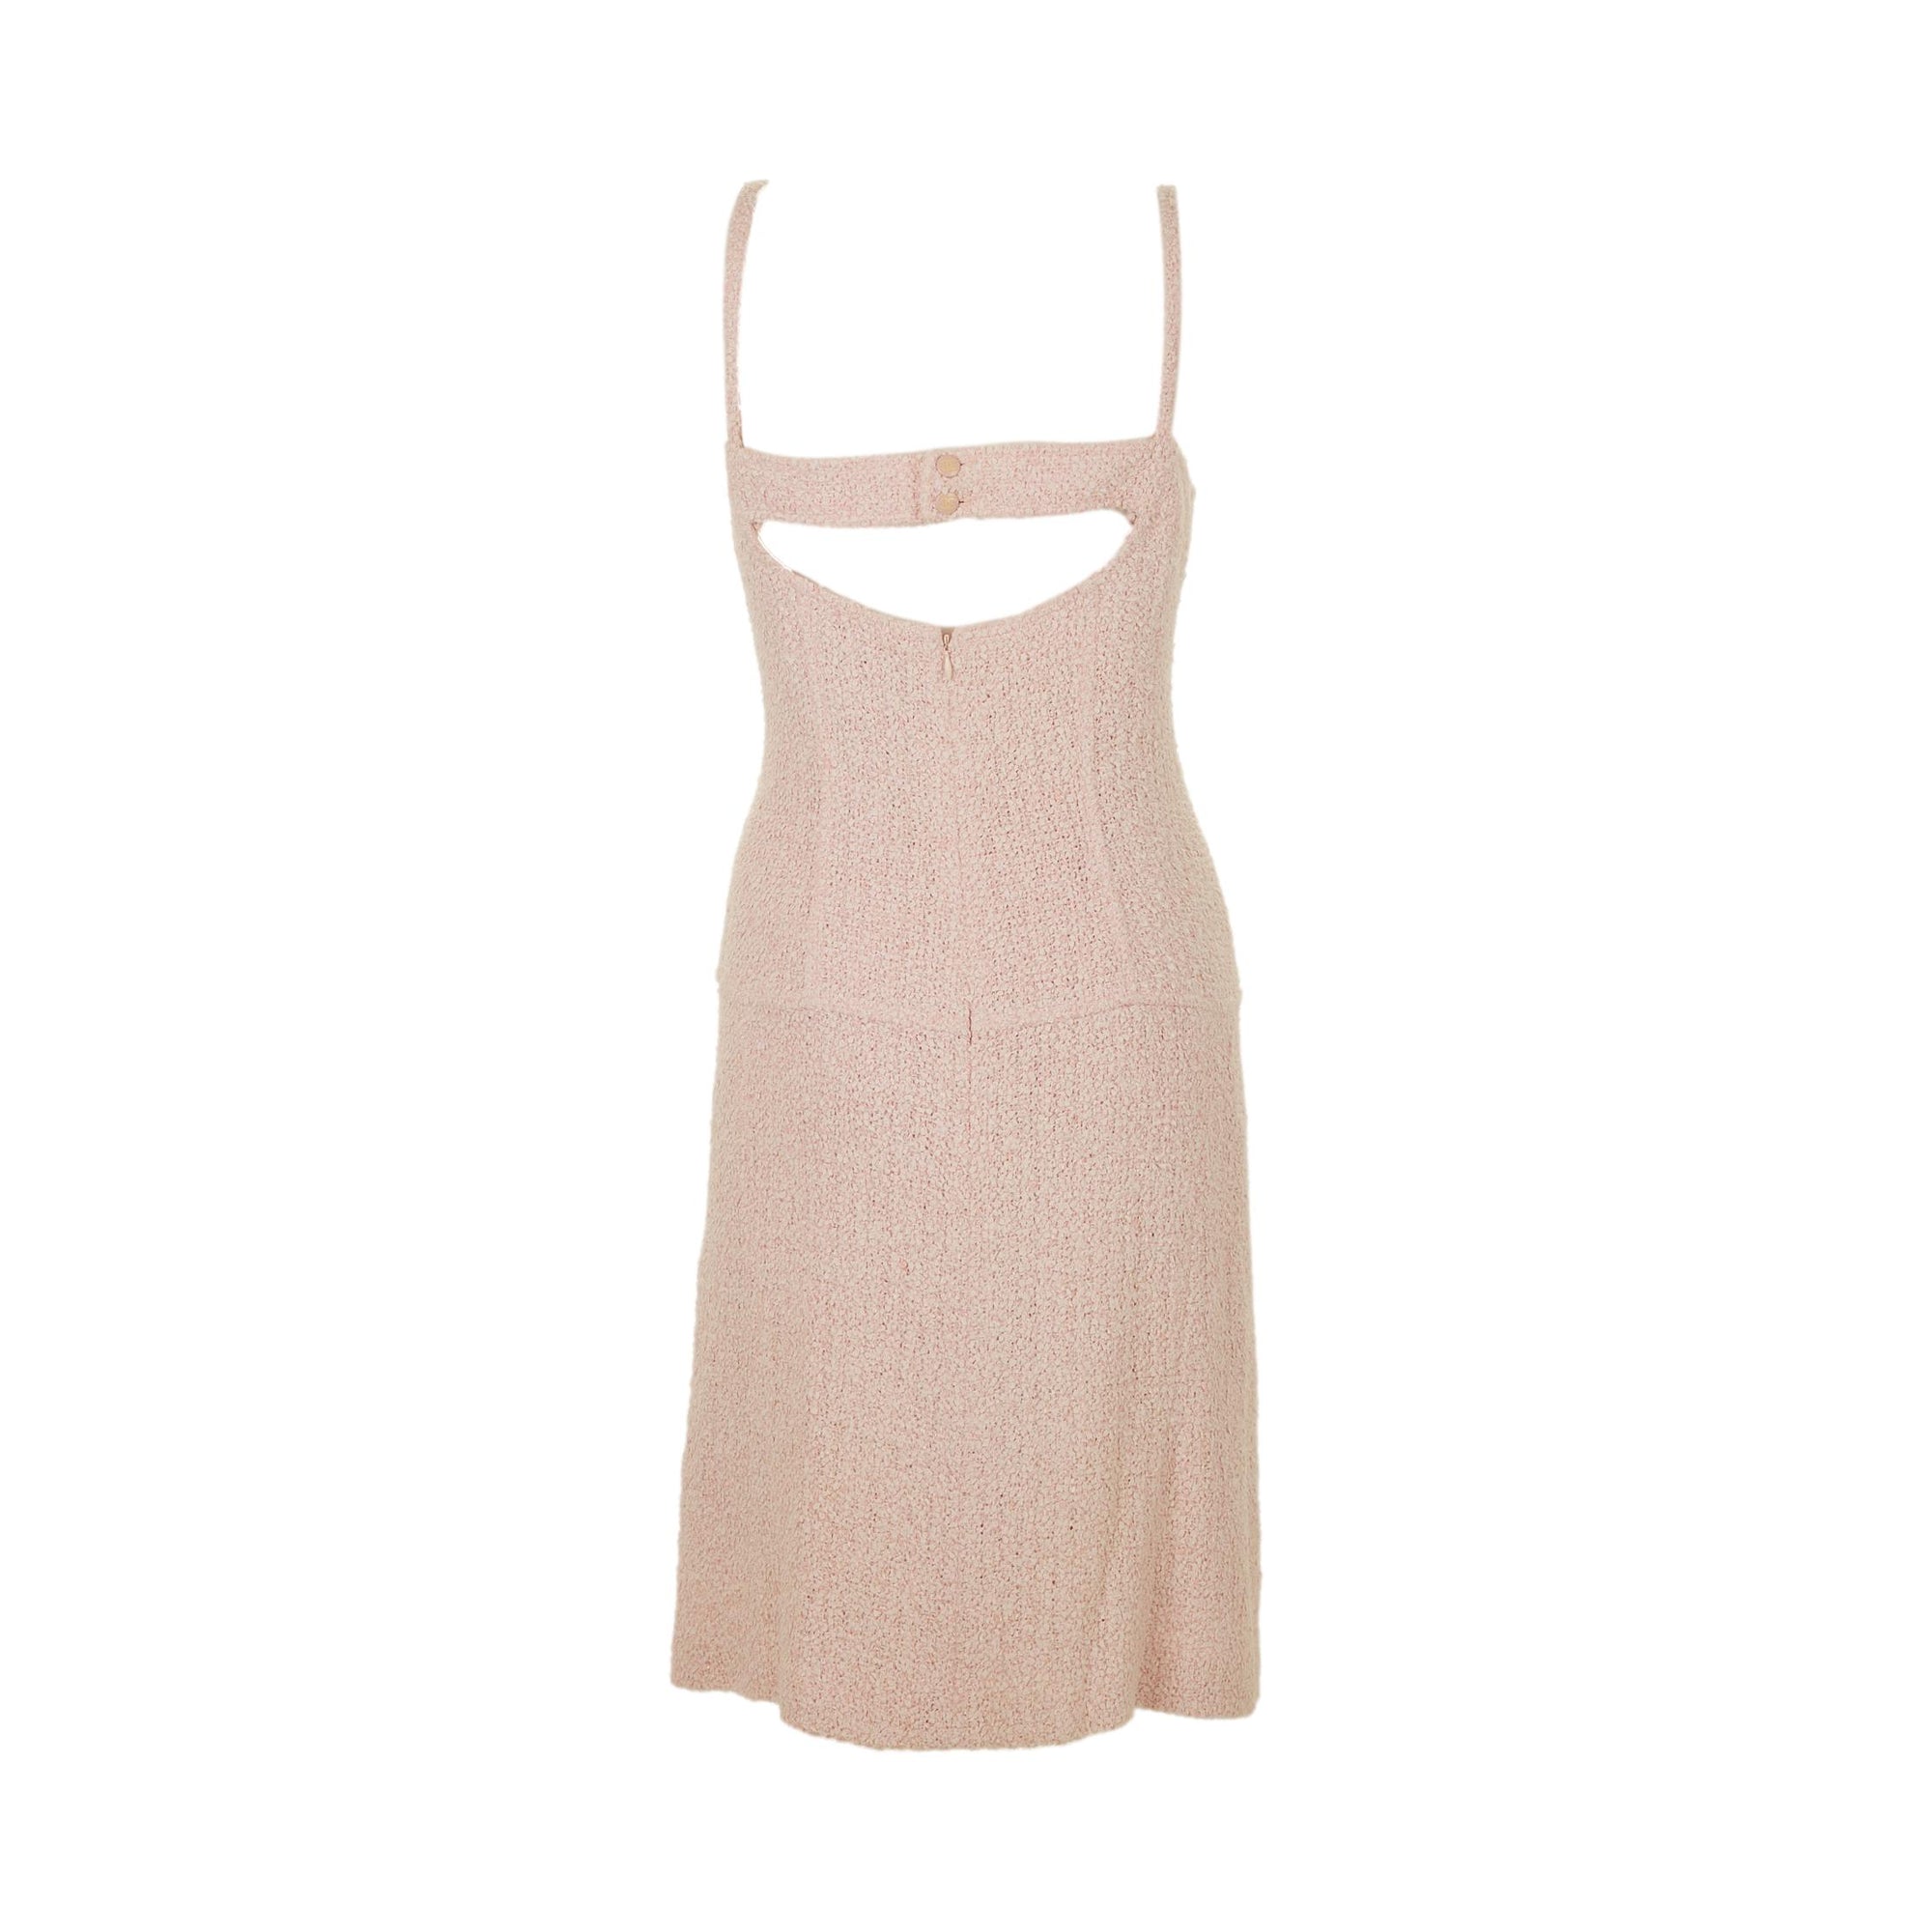 Chanel Baby Pink Tweed Dress